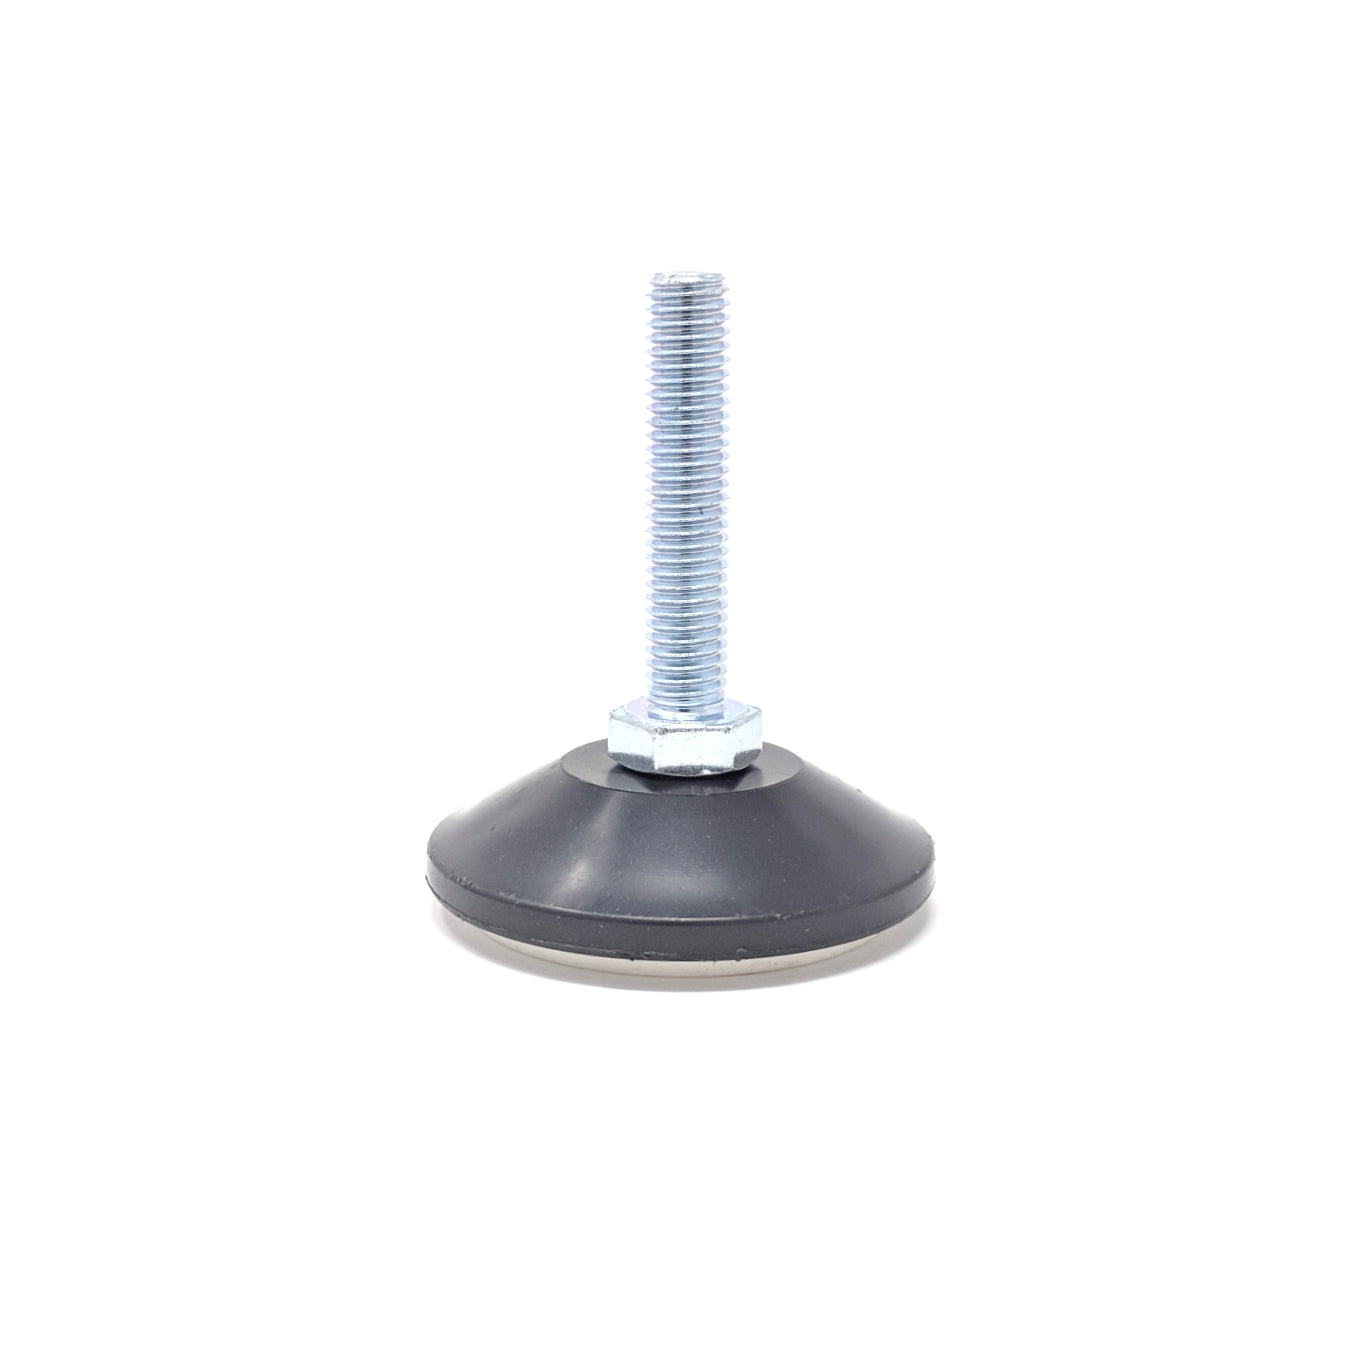 48mm-M8x40mm Non-Slip Screw In Levelling Machine Feet Height Adjustable, Made In Germany - Keay Vital Parts